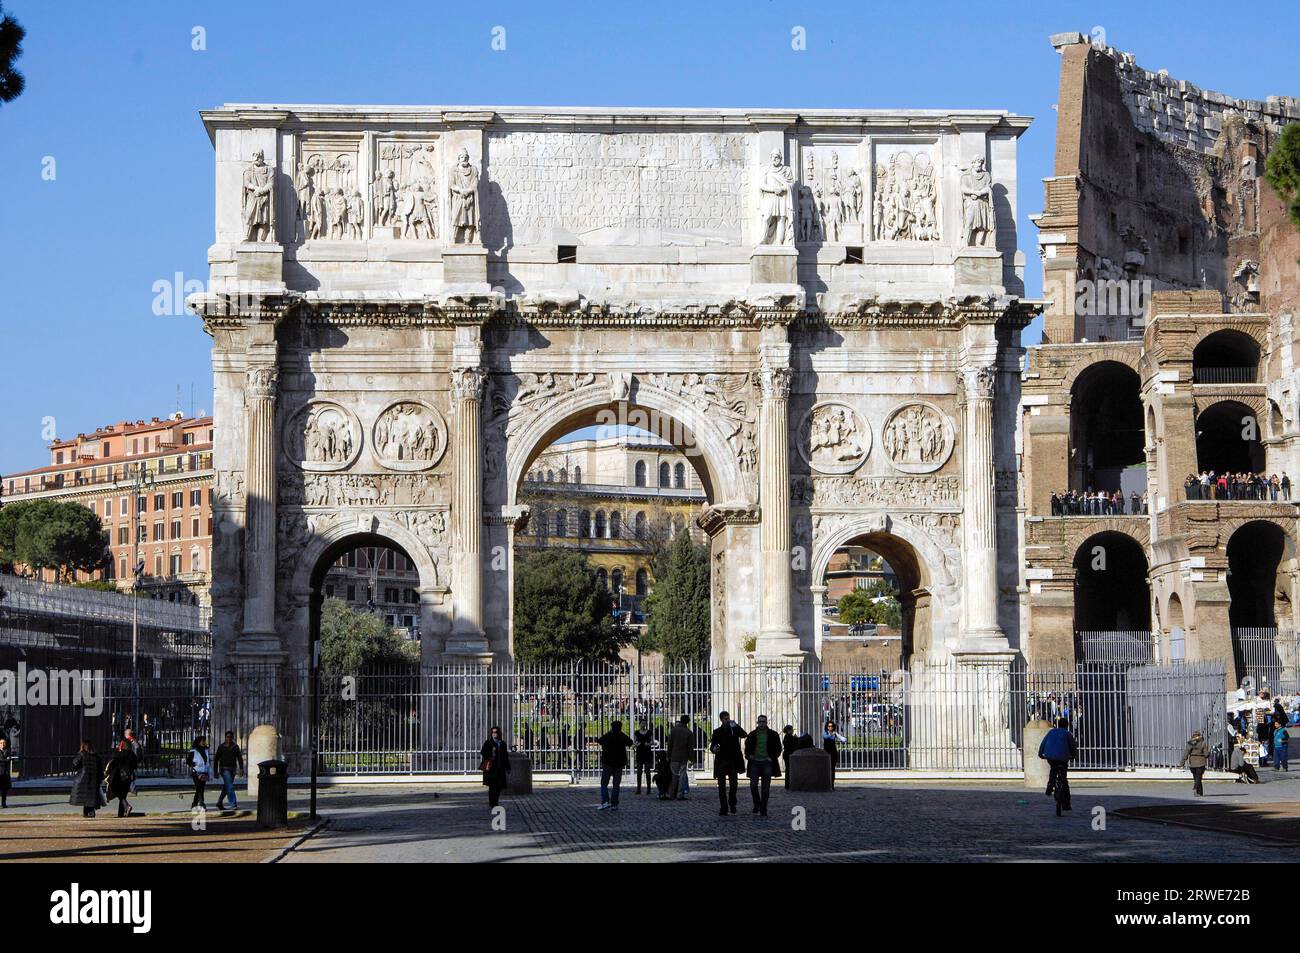 Frontal view of Arch of Constantine Triumphal Arch of Emperor Constantine with few people tourists, at the right edge of the picture Colosseum, Rome Stock Photo